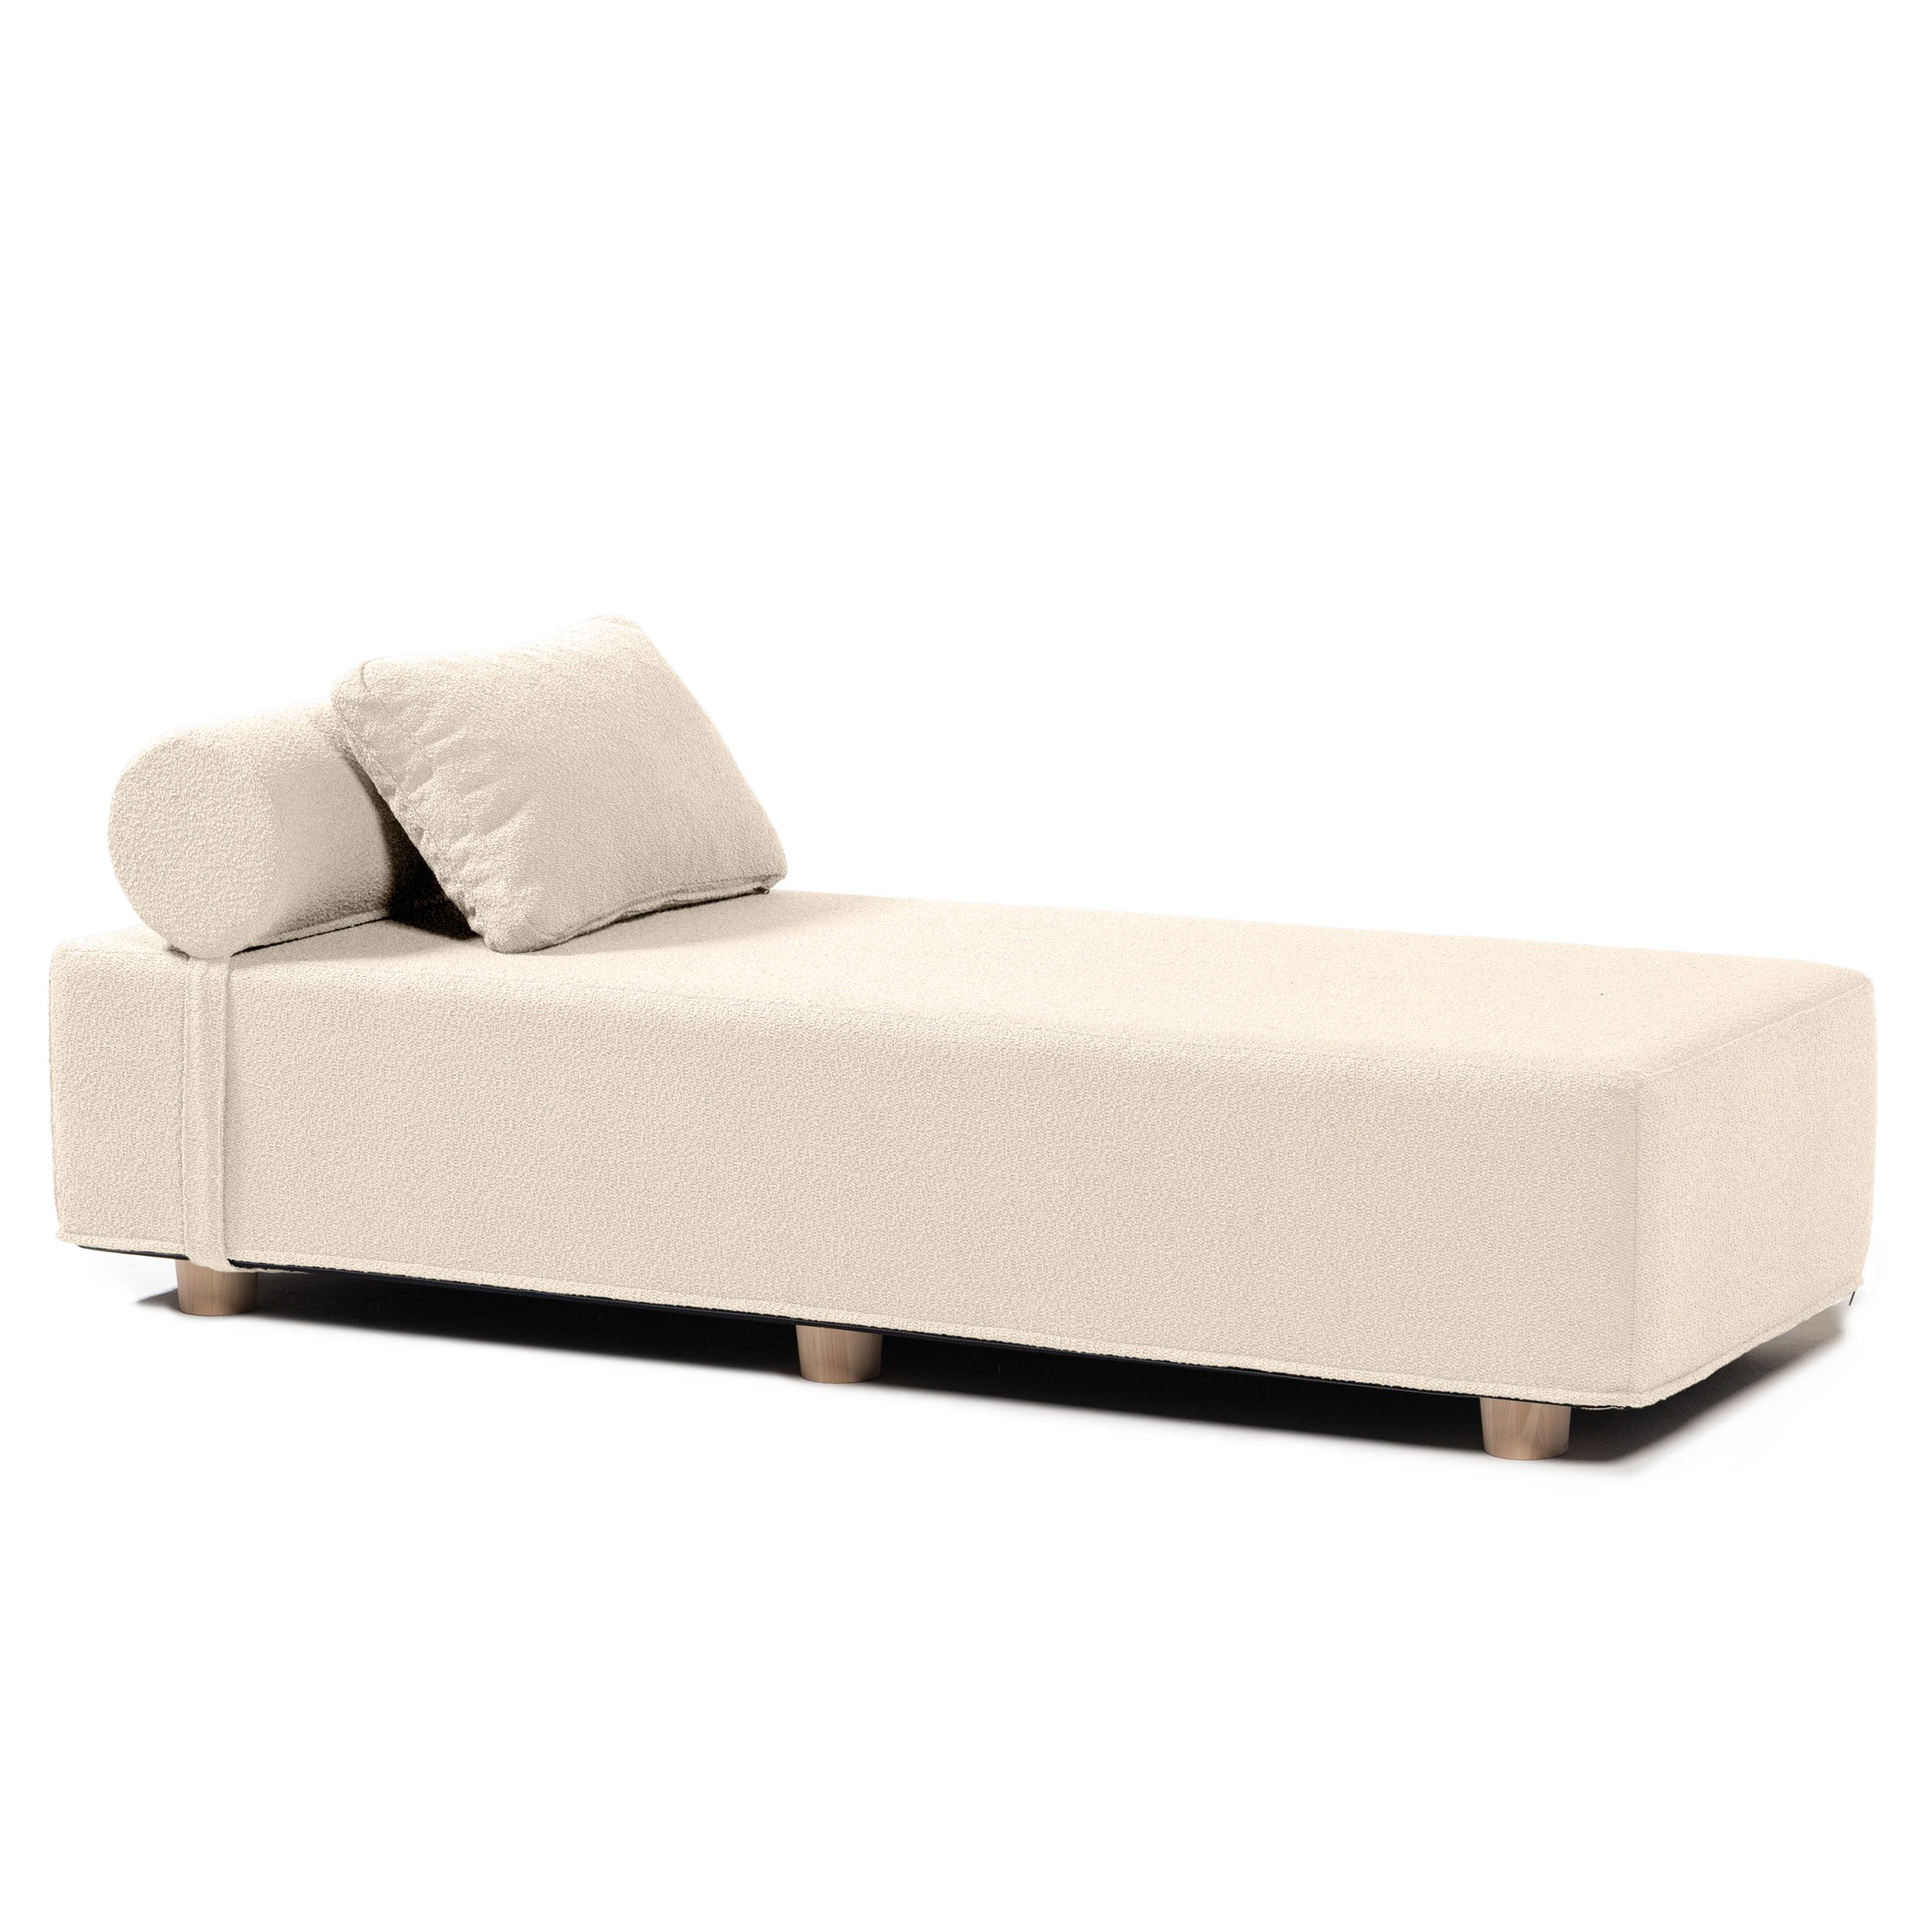 alvy-daybed-boucle-cream-gladys206-product-1-3000x3000.jpg